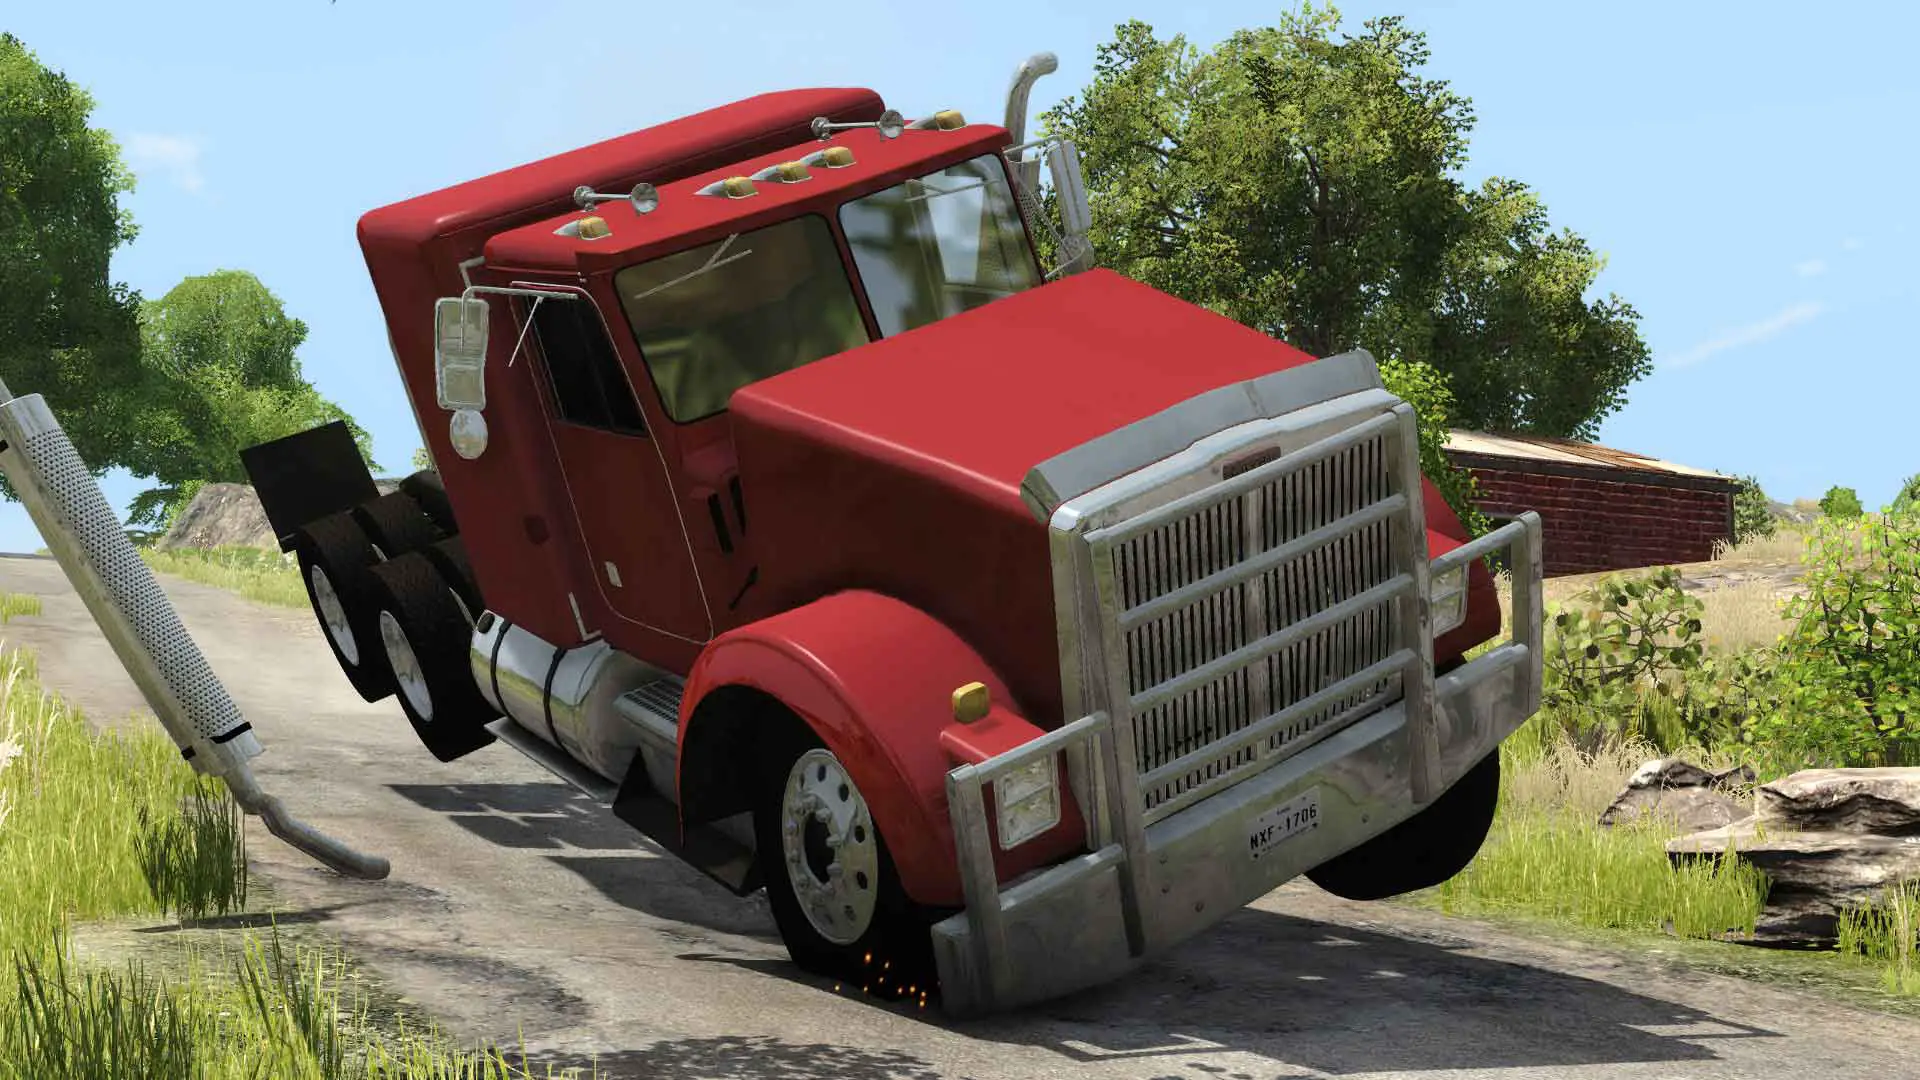 is beamng drive free